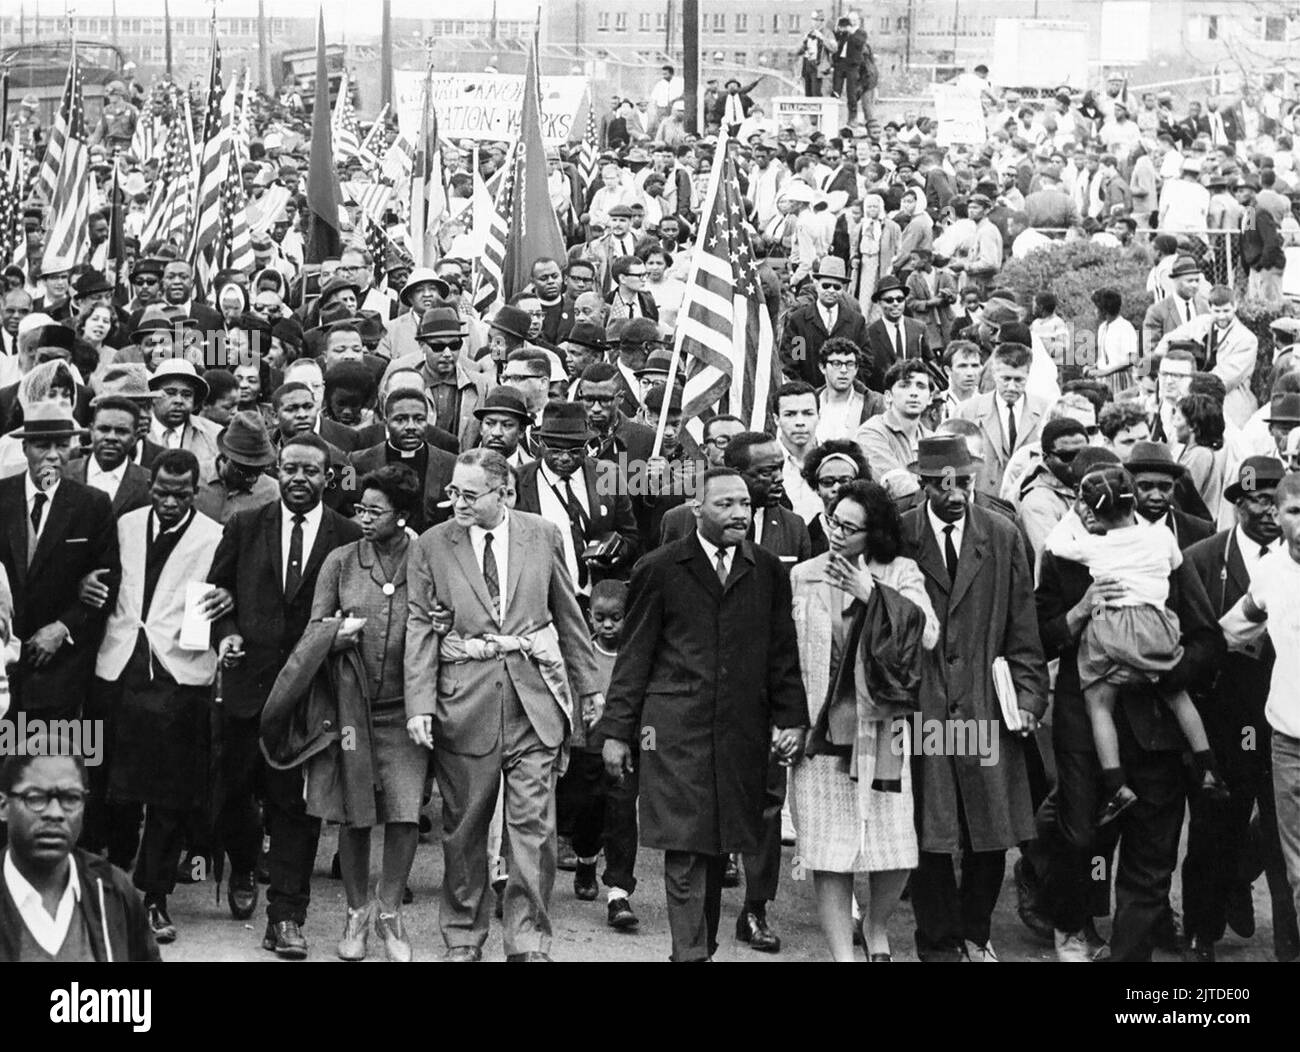 Martin Luther King, Jr. leads nonviolent demonstrators into Montgomery, Alabama, toward the steps of the Alabama State Capitol Building on March 25, 1965, the final day of the Selma to Montgomery Marches. Pictured in the front row line (from L to R) are A. Philip Randolph, John Lewis, Ralph Abernathy, Ruth Harris Bunch, Ralph Bunch, Martin Luther King, Coretta Scott King, Fred Shuttlesworth, and Hosea Williams (holding girl.) Stock Photo